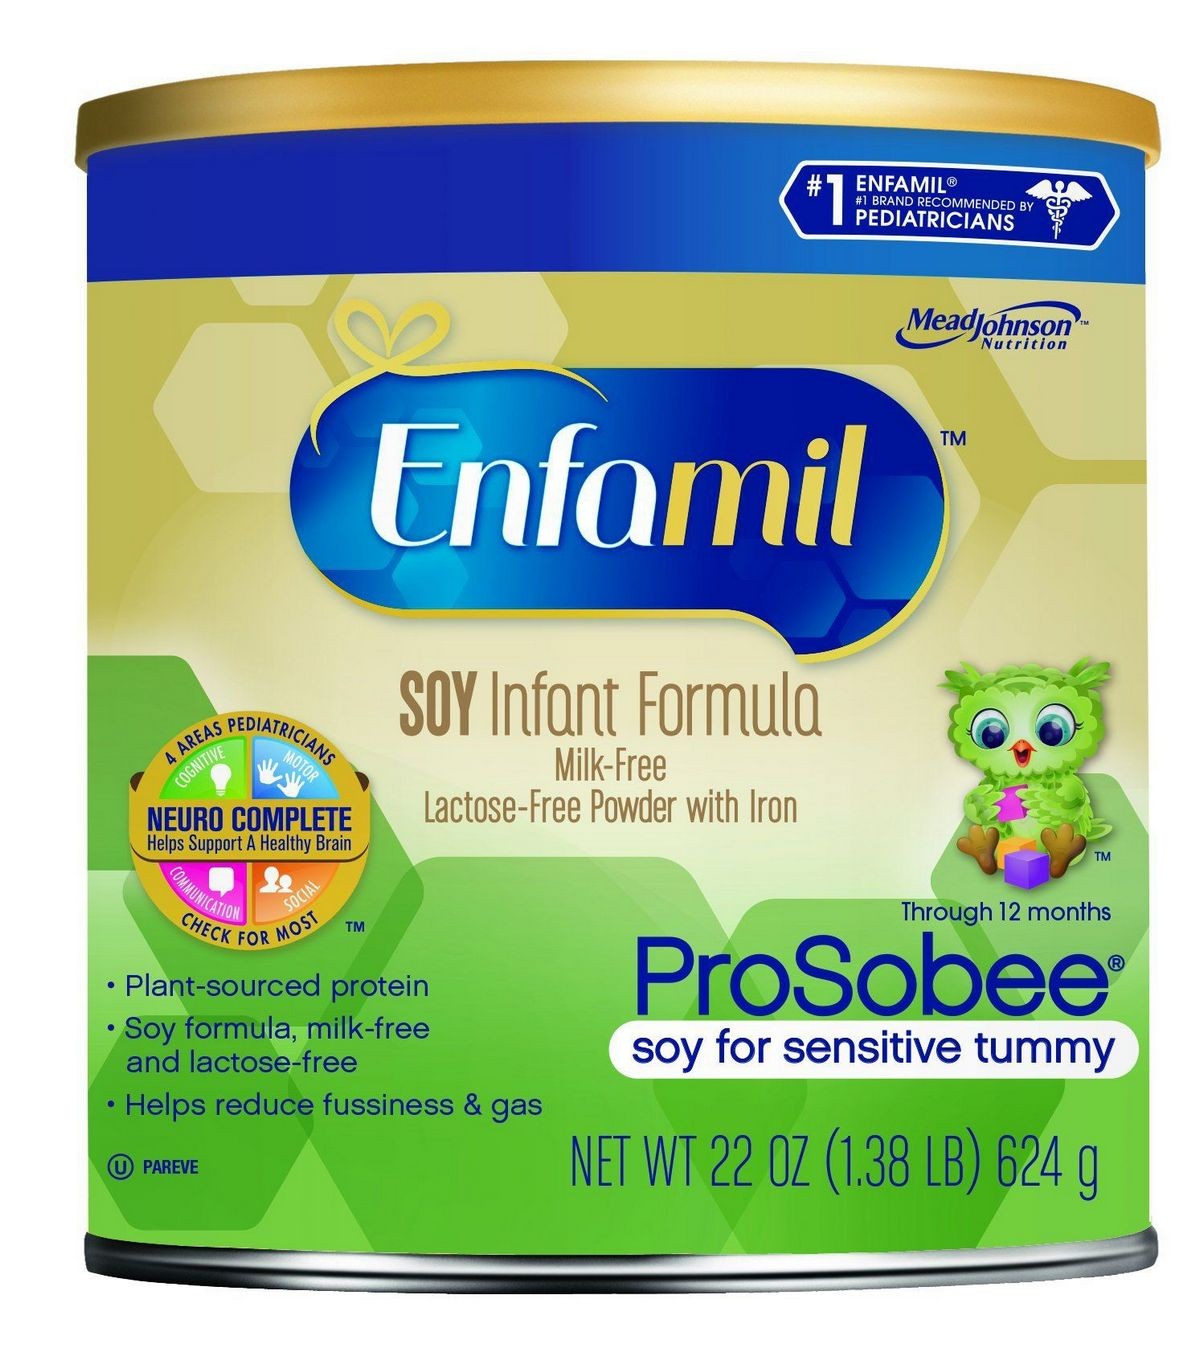 Is Soy Formula Good or Bad for Babies